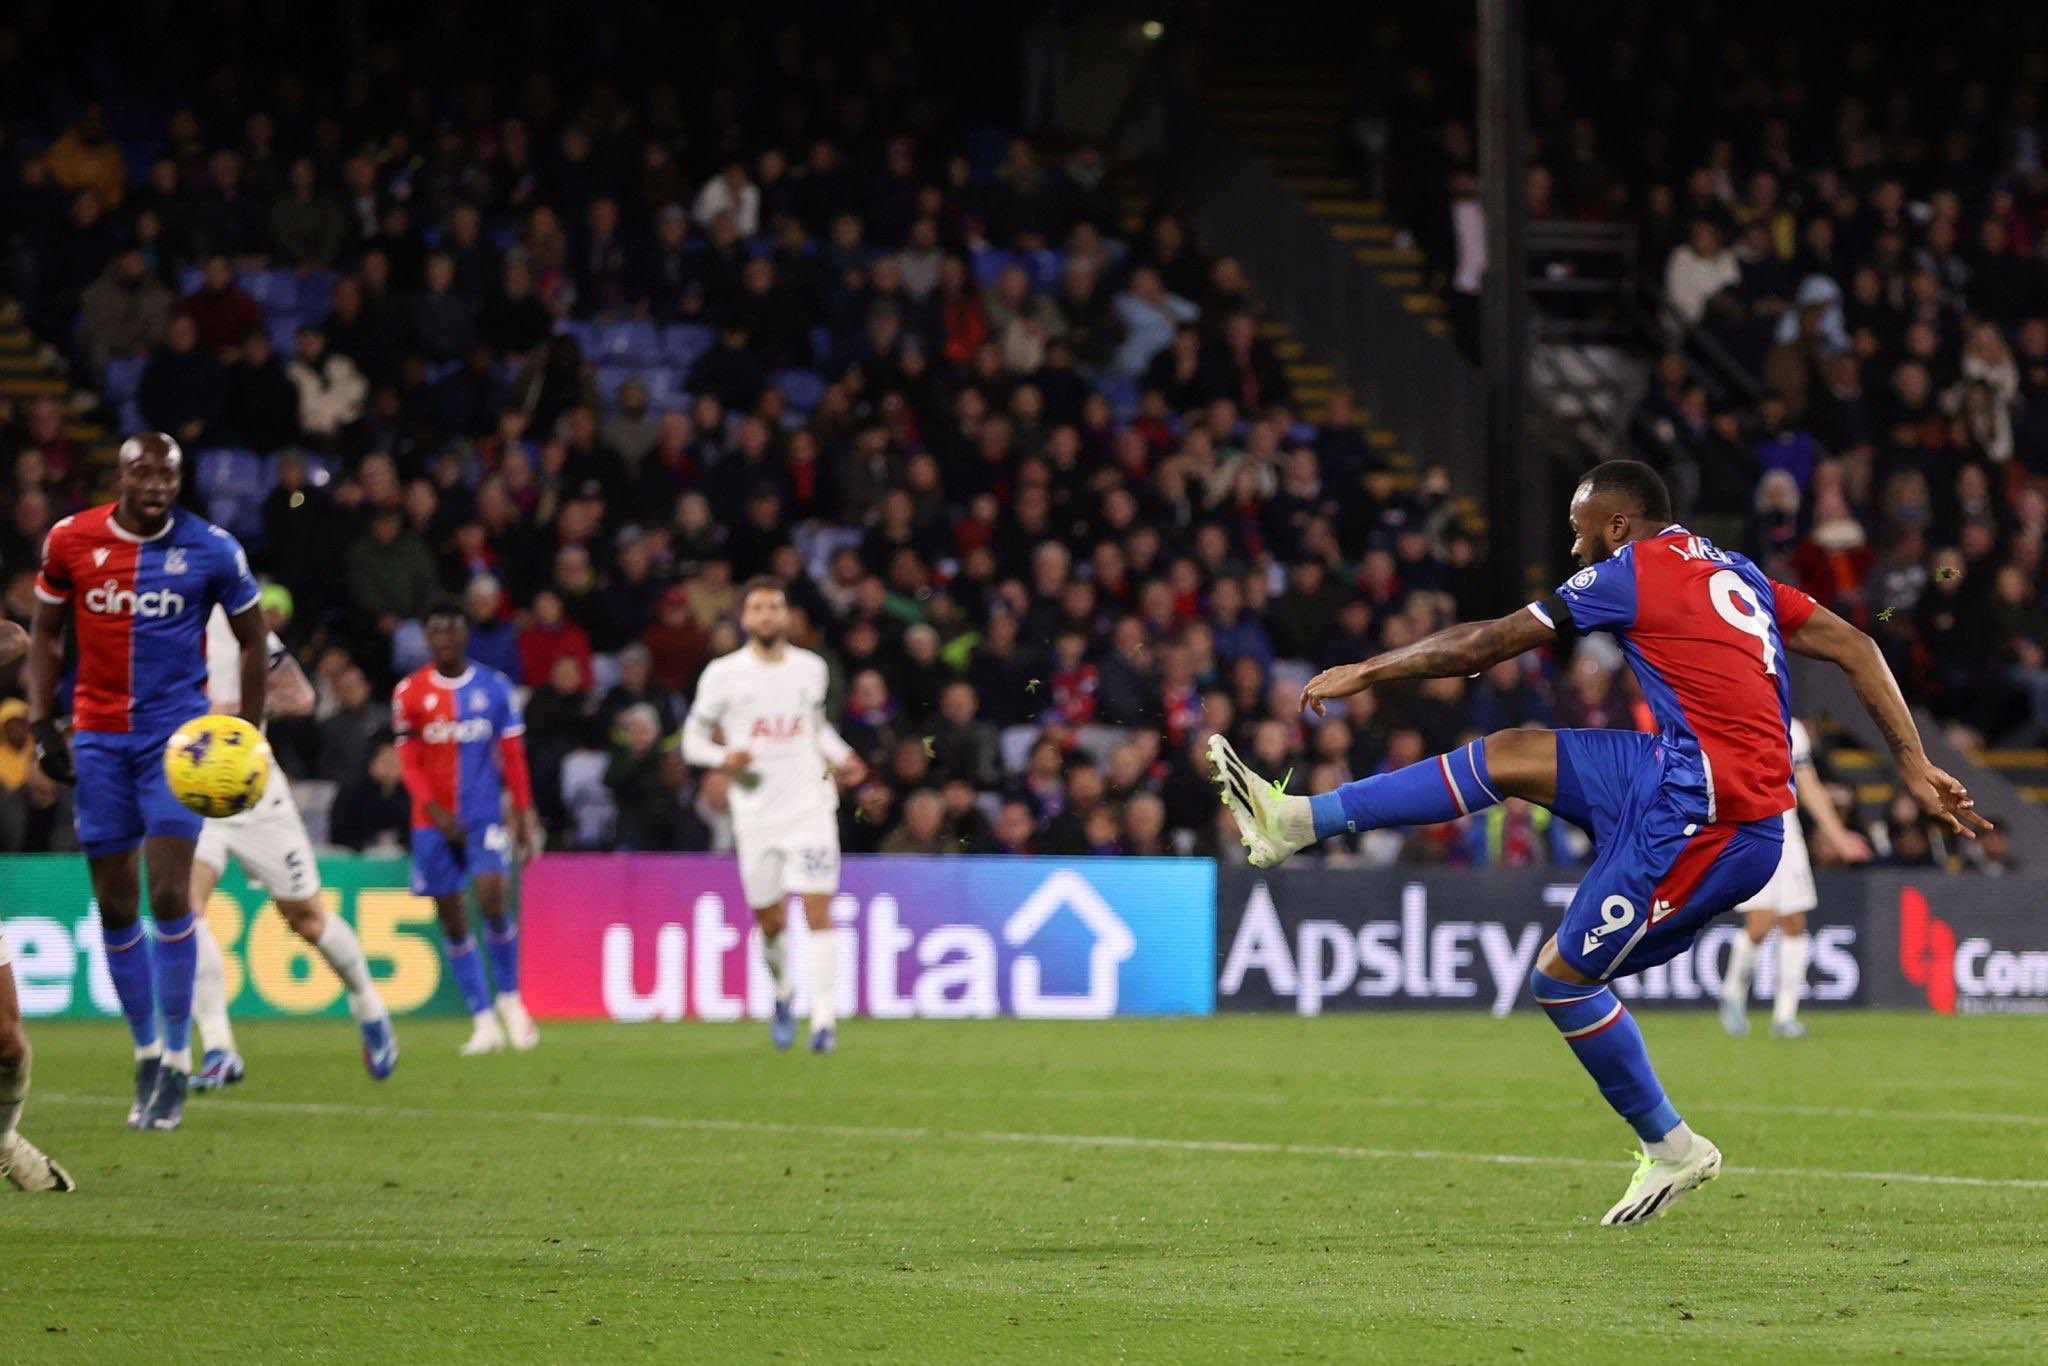 Jordan Ayew scores lovely volley for Crystal Palace in Tottenham defeat